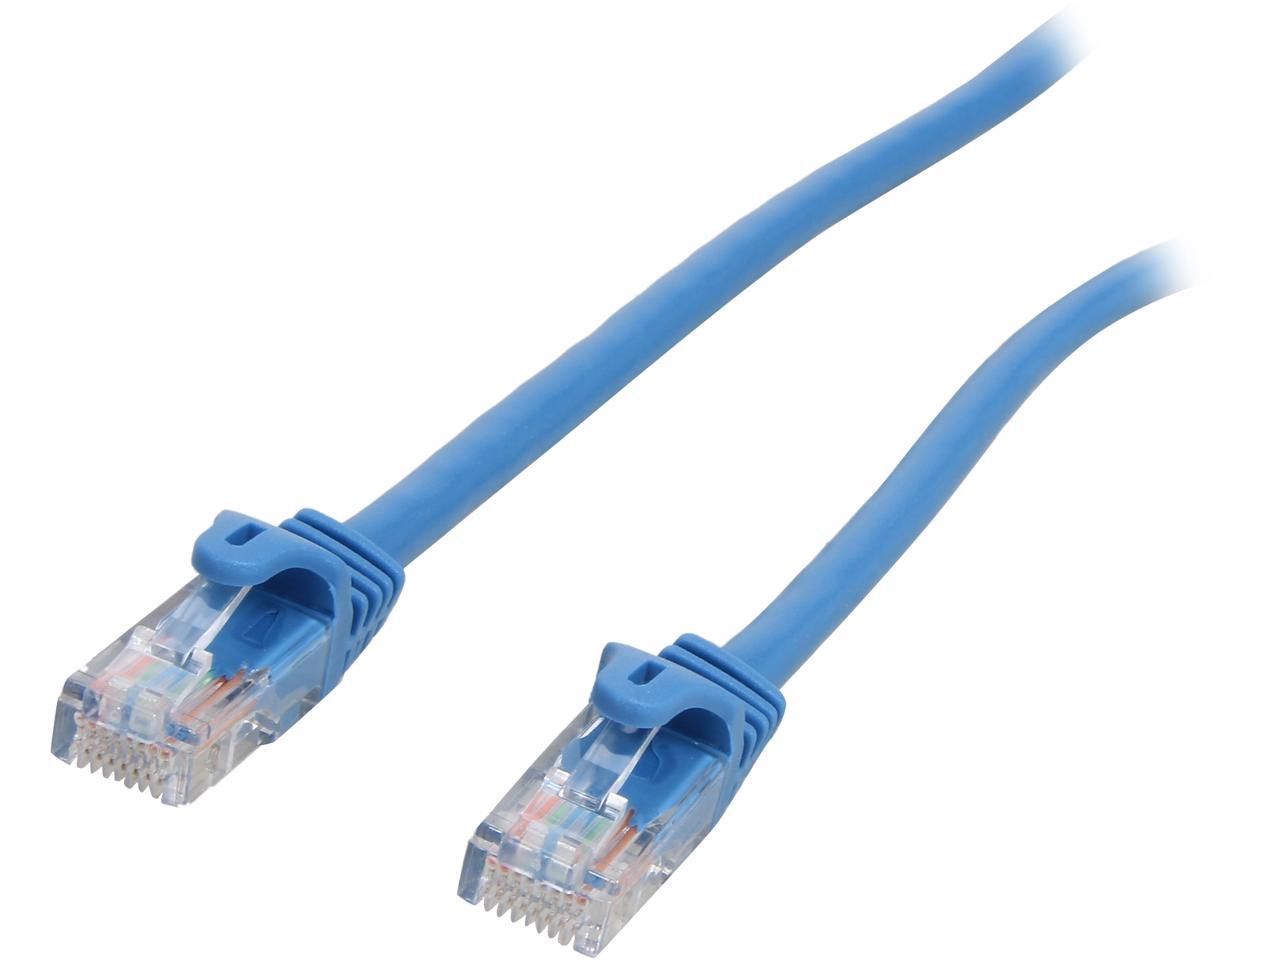 10m CAT5e/6 NETWORK PATCH CABLE 26/24awg Gigabit Lead Internet LAN Snagless Lot 